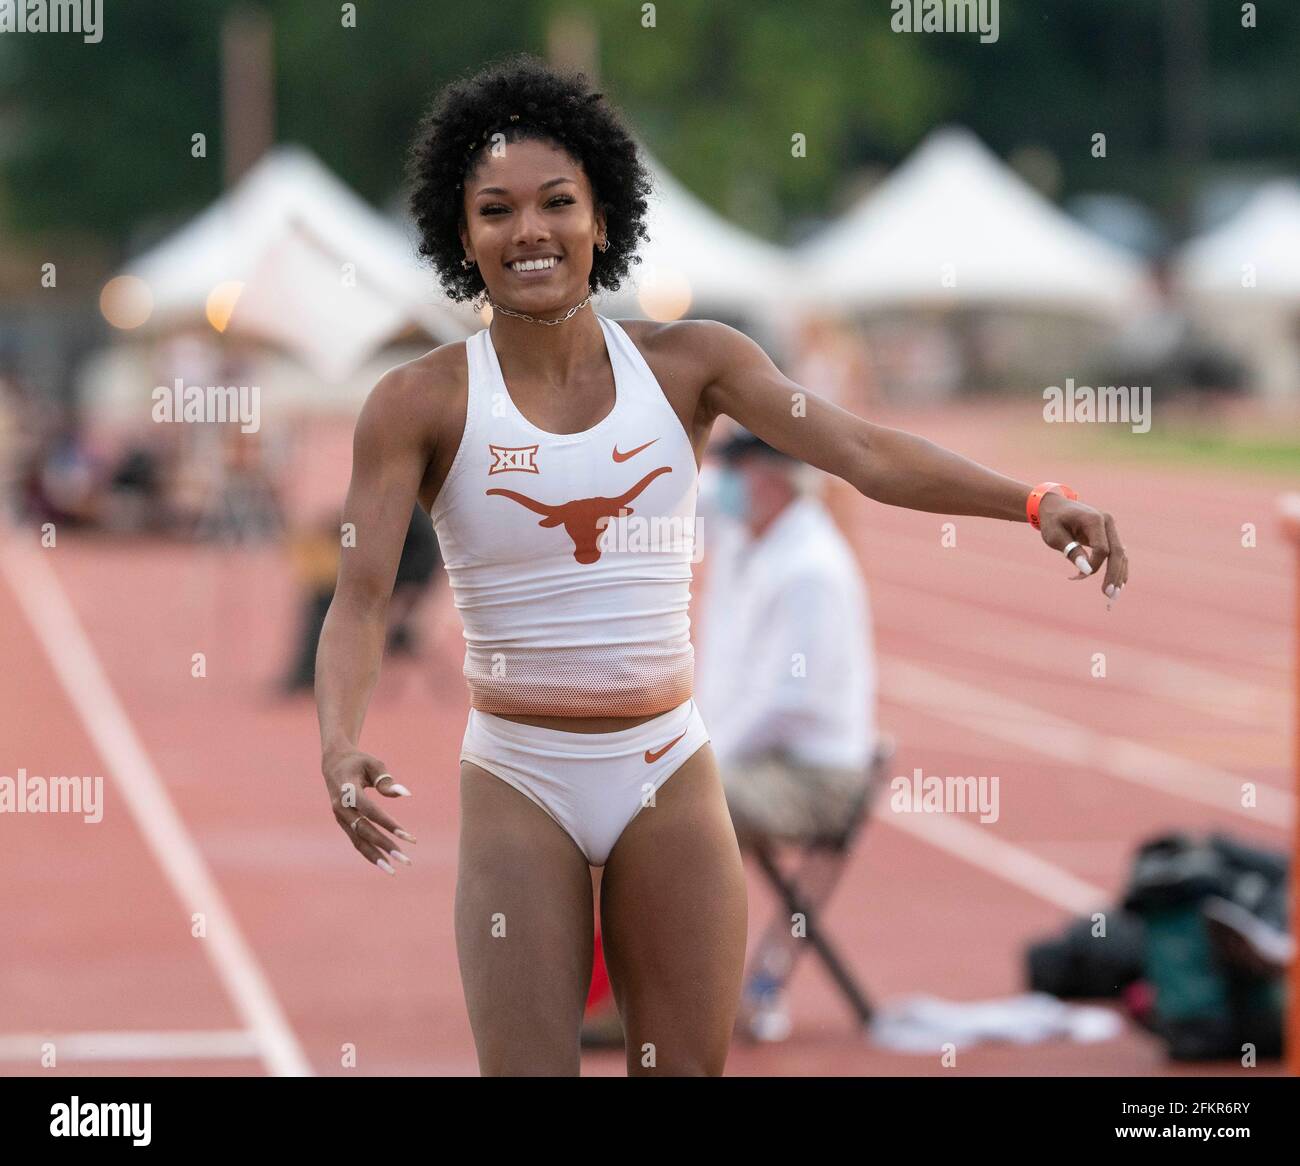 Austin, Texas, USA. 01st May, 2021. University of Texas women's long jump ace Tara Davis smiles after an easy victory at the Texas Invitational as she continues a quest for a spot on the 2021 U.S. Olympic team. Credit: Bob Daemmrich/Alamy Live News Credit: Bob Daemmrich/Alamy Live News Stock Photo